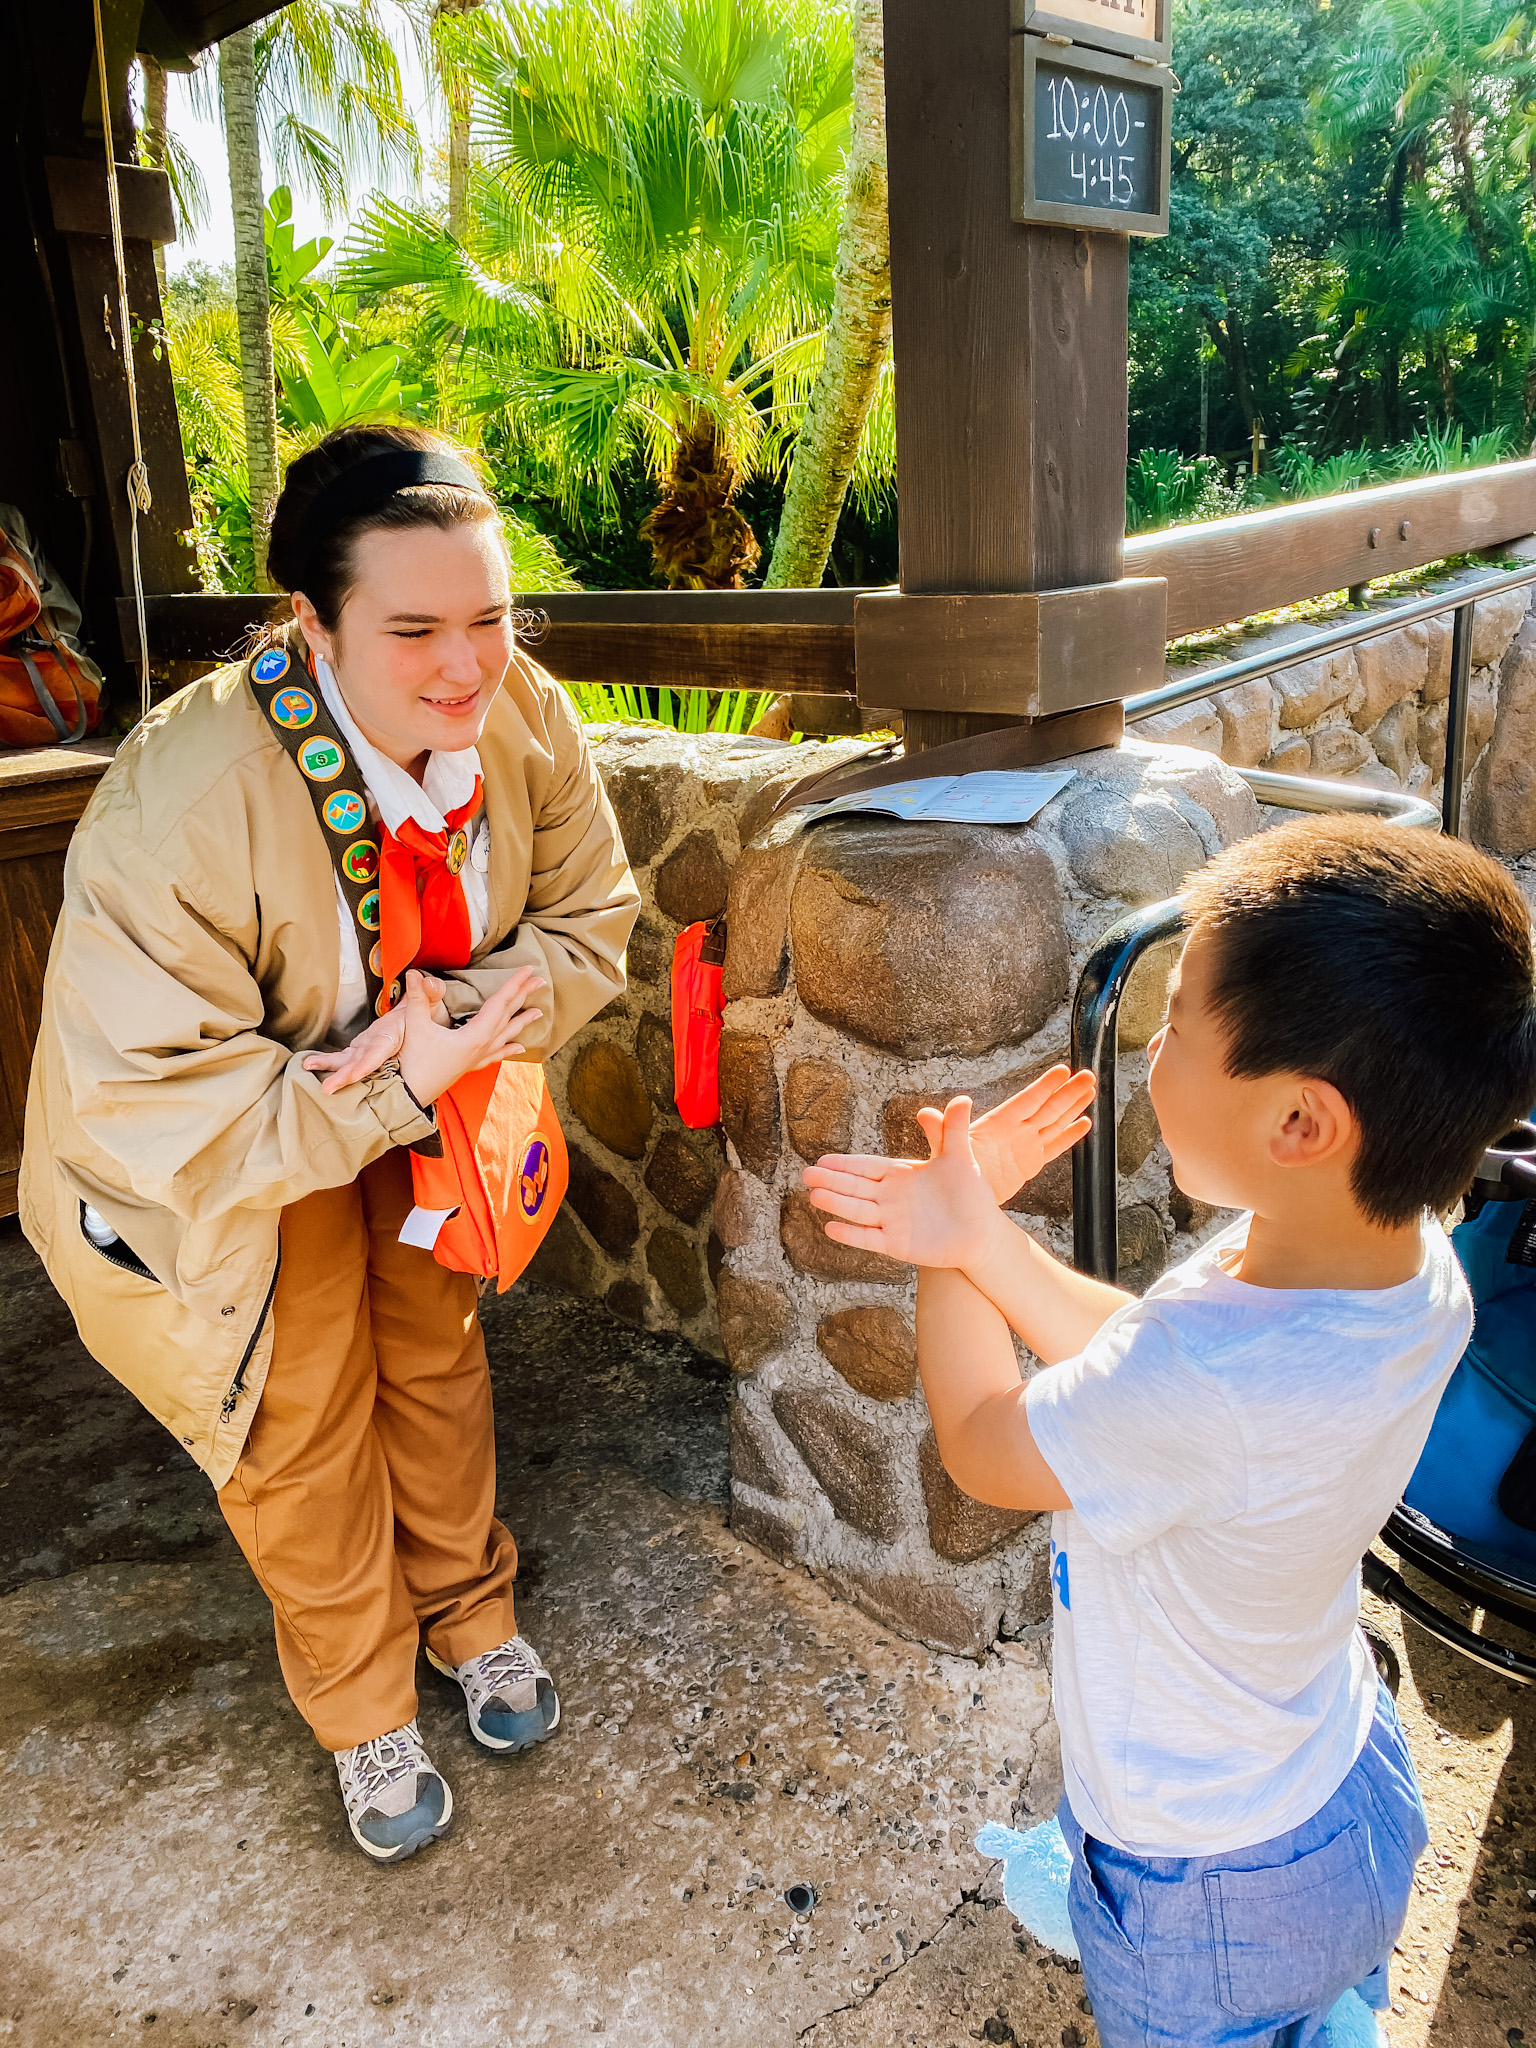 cast member and child doing the wilderness explorers call with their hands linked together